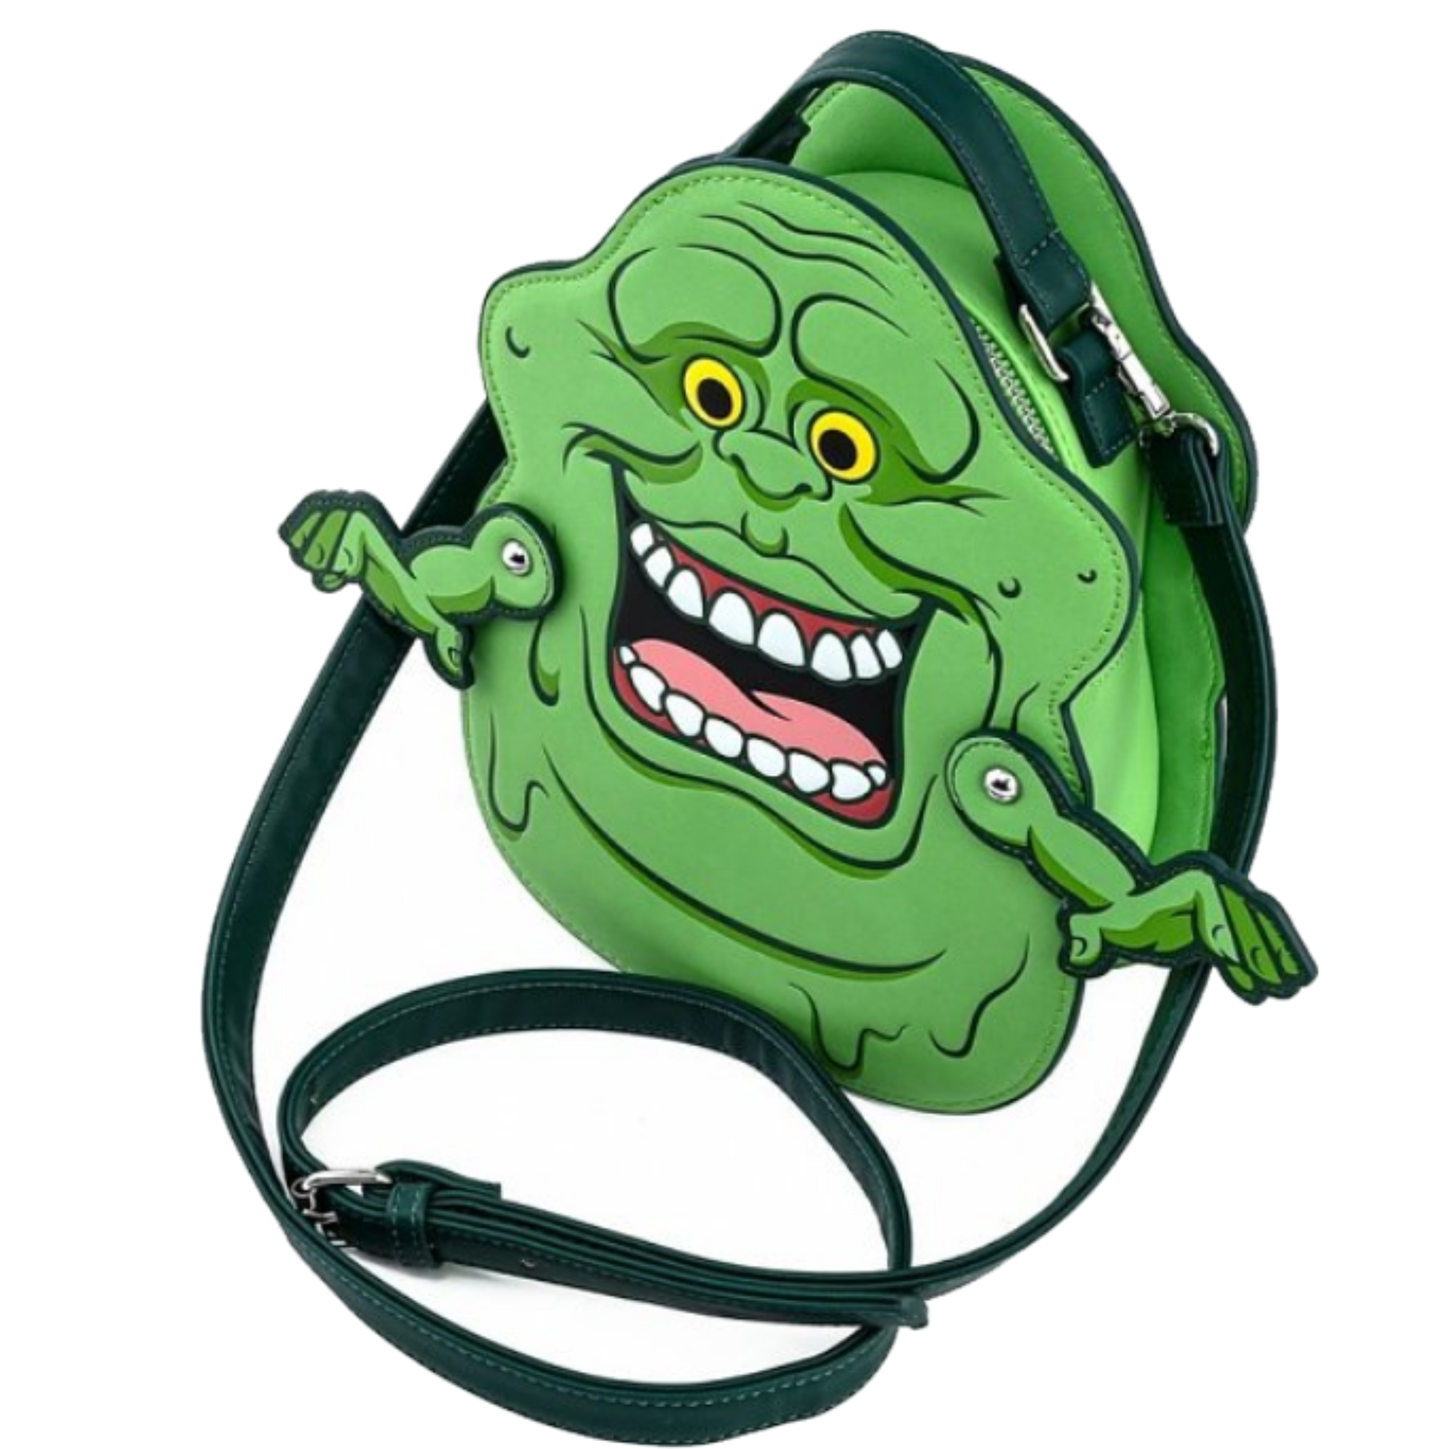 Loungefly x Ghostbusters Slimer Convertible Mini Backpack